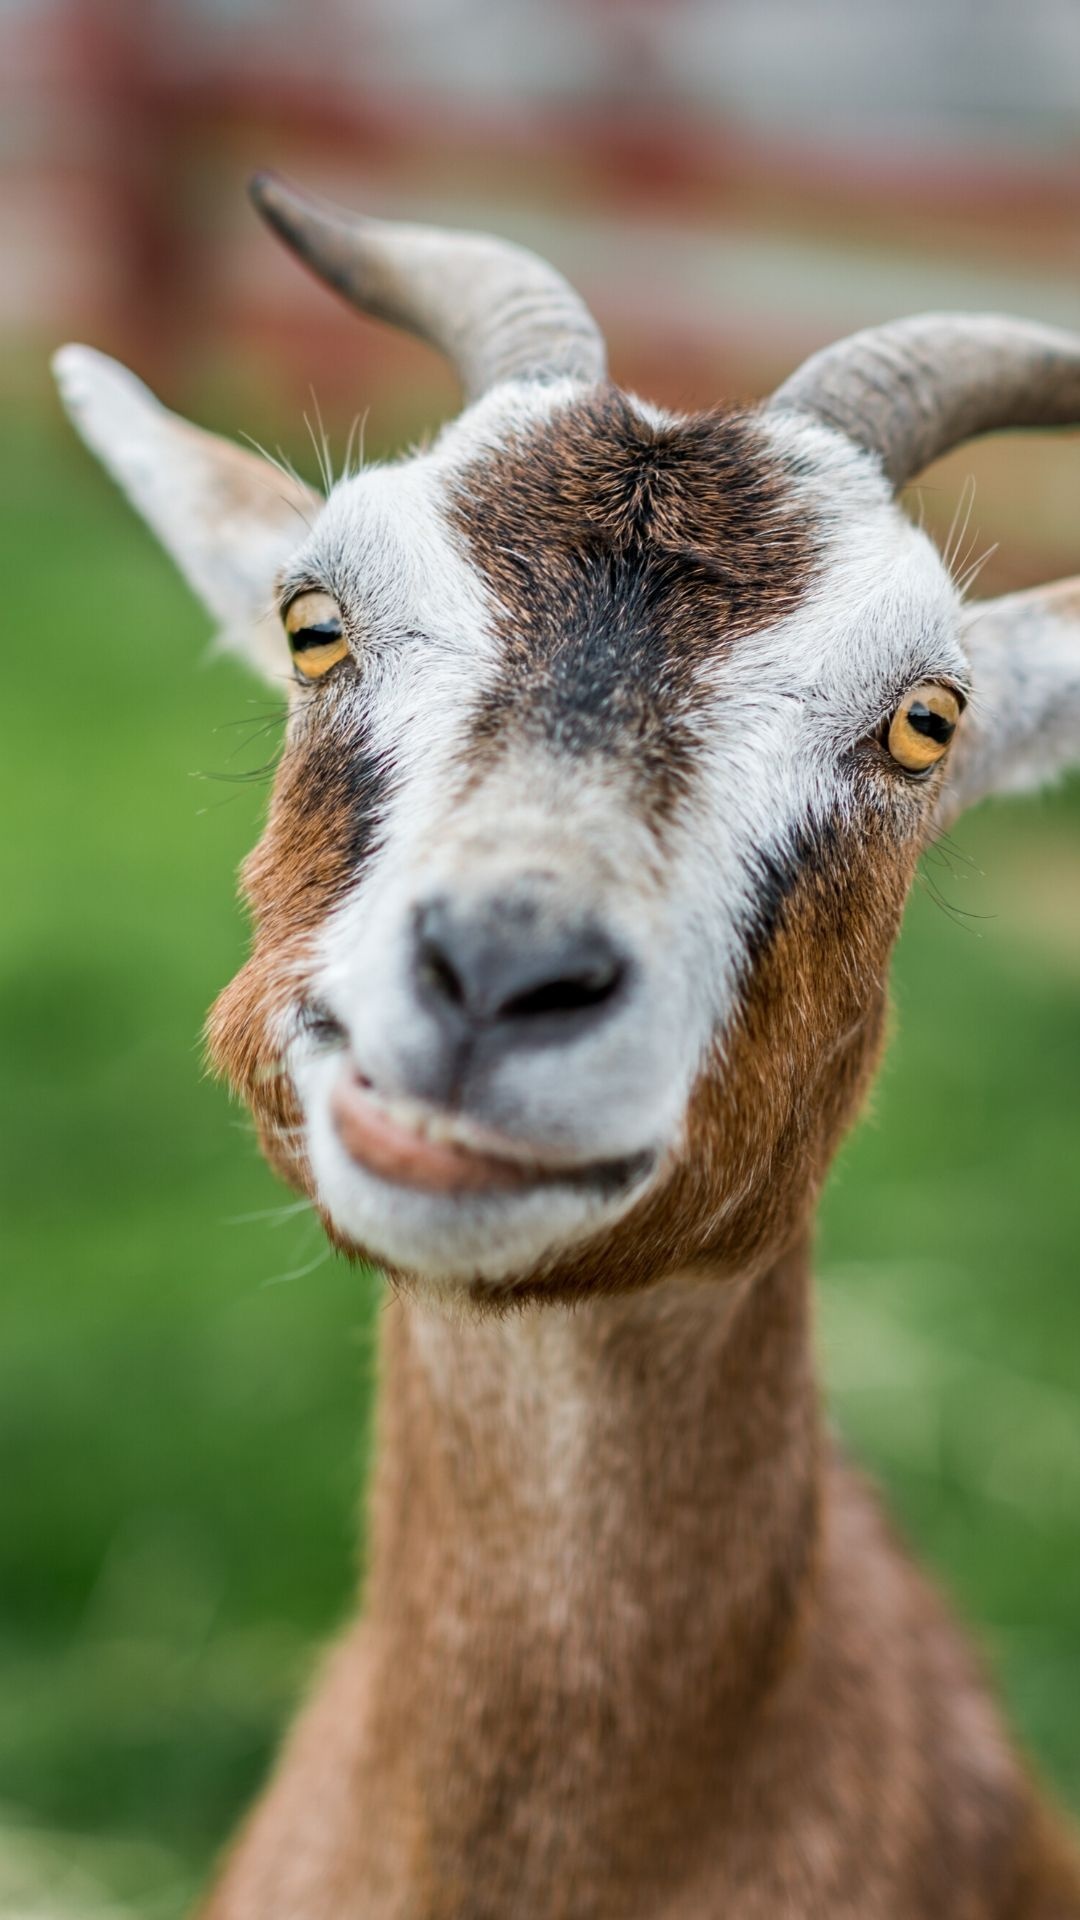 Funny goat pictures, Amusing goat moments, Hilarious goat wallpapers, Goats with personality, 1080x1920 Full HD Phone